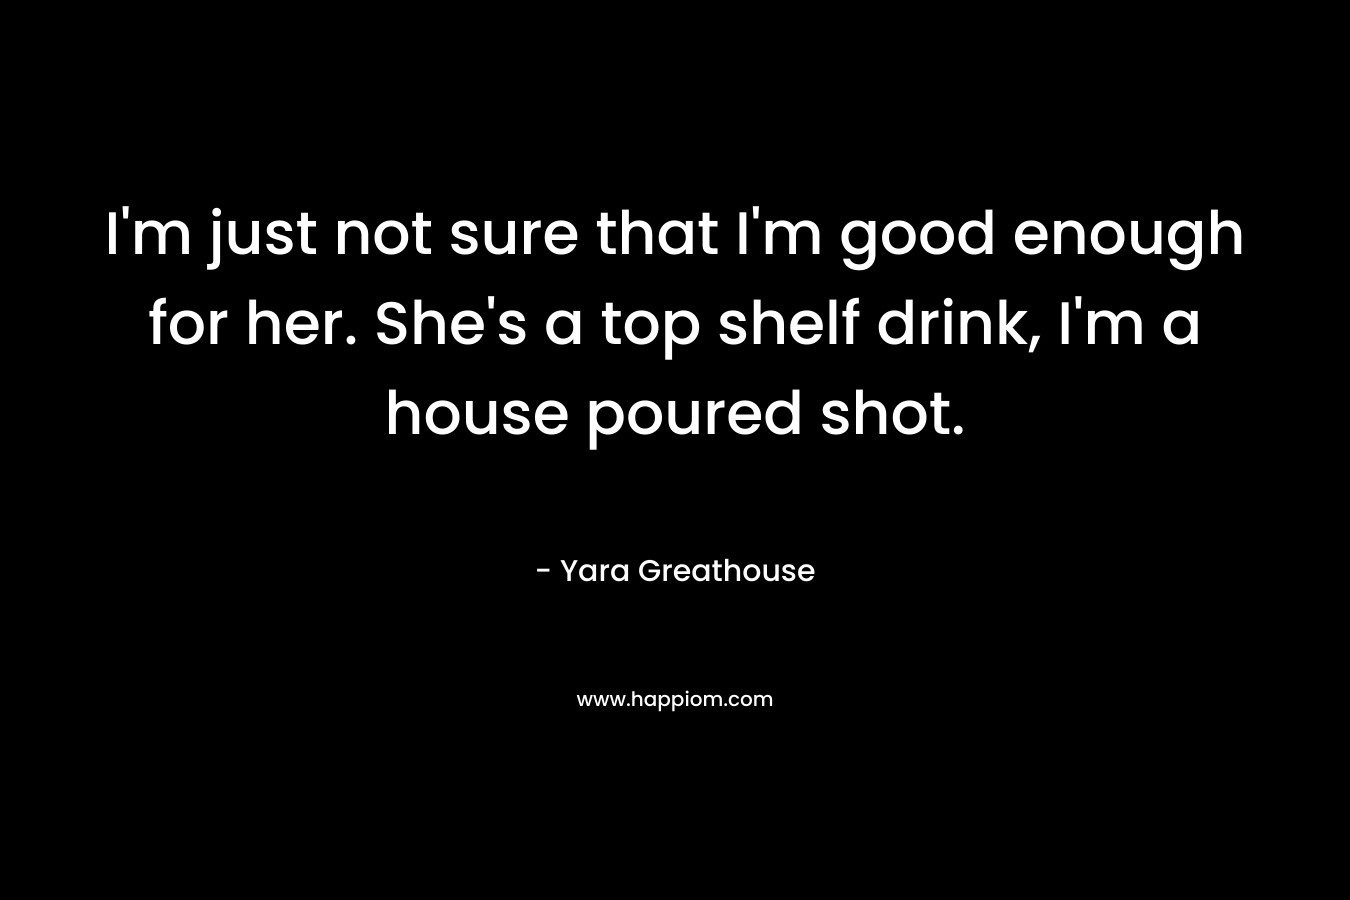 I’m just not sure that I’m good enough for her. She’s a top shelf drink, I’m a house poured shot. – Yara Greathouse